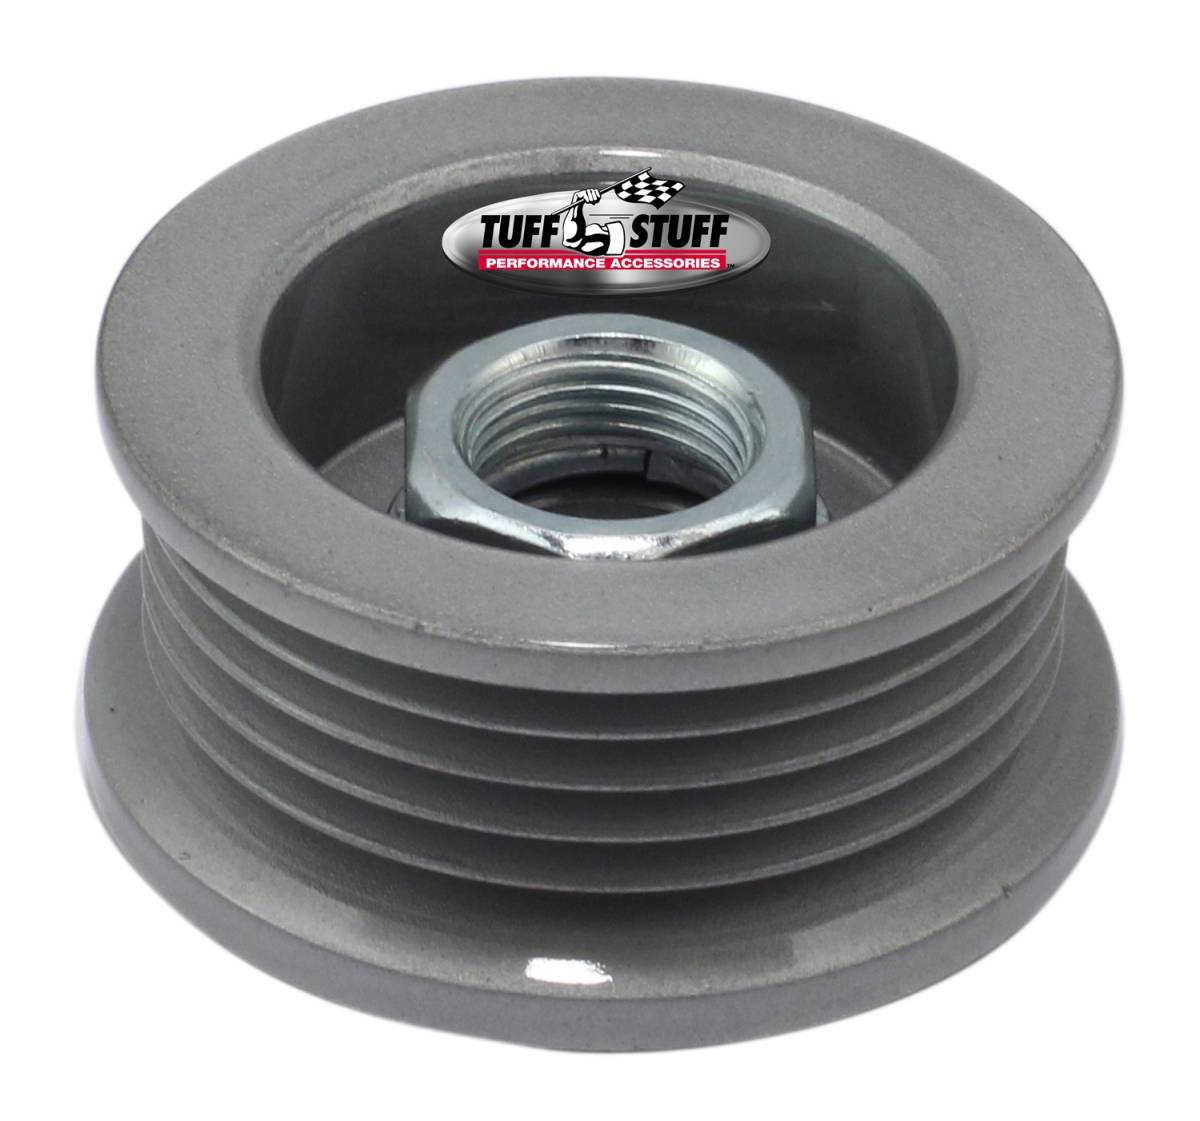 Tuff Stuff Performance - Alternator Pulley 2.25 in. 5 Groove Serpentine Incl. Lock Washer/Nut As Cast 7610BC